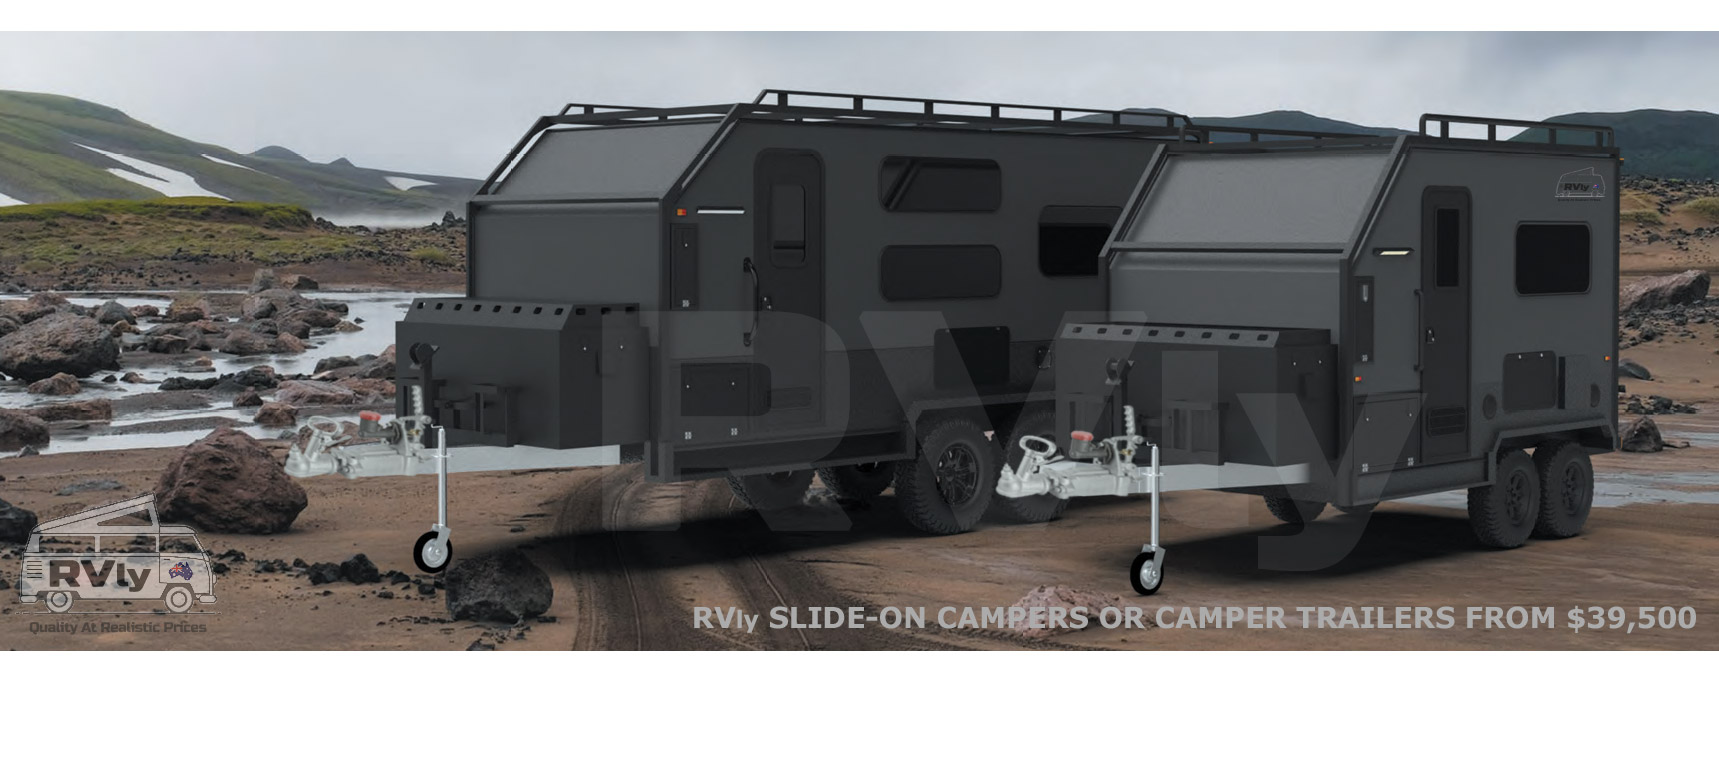 RVly Camper Trailers